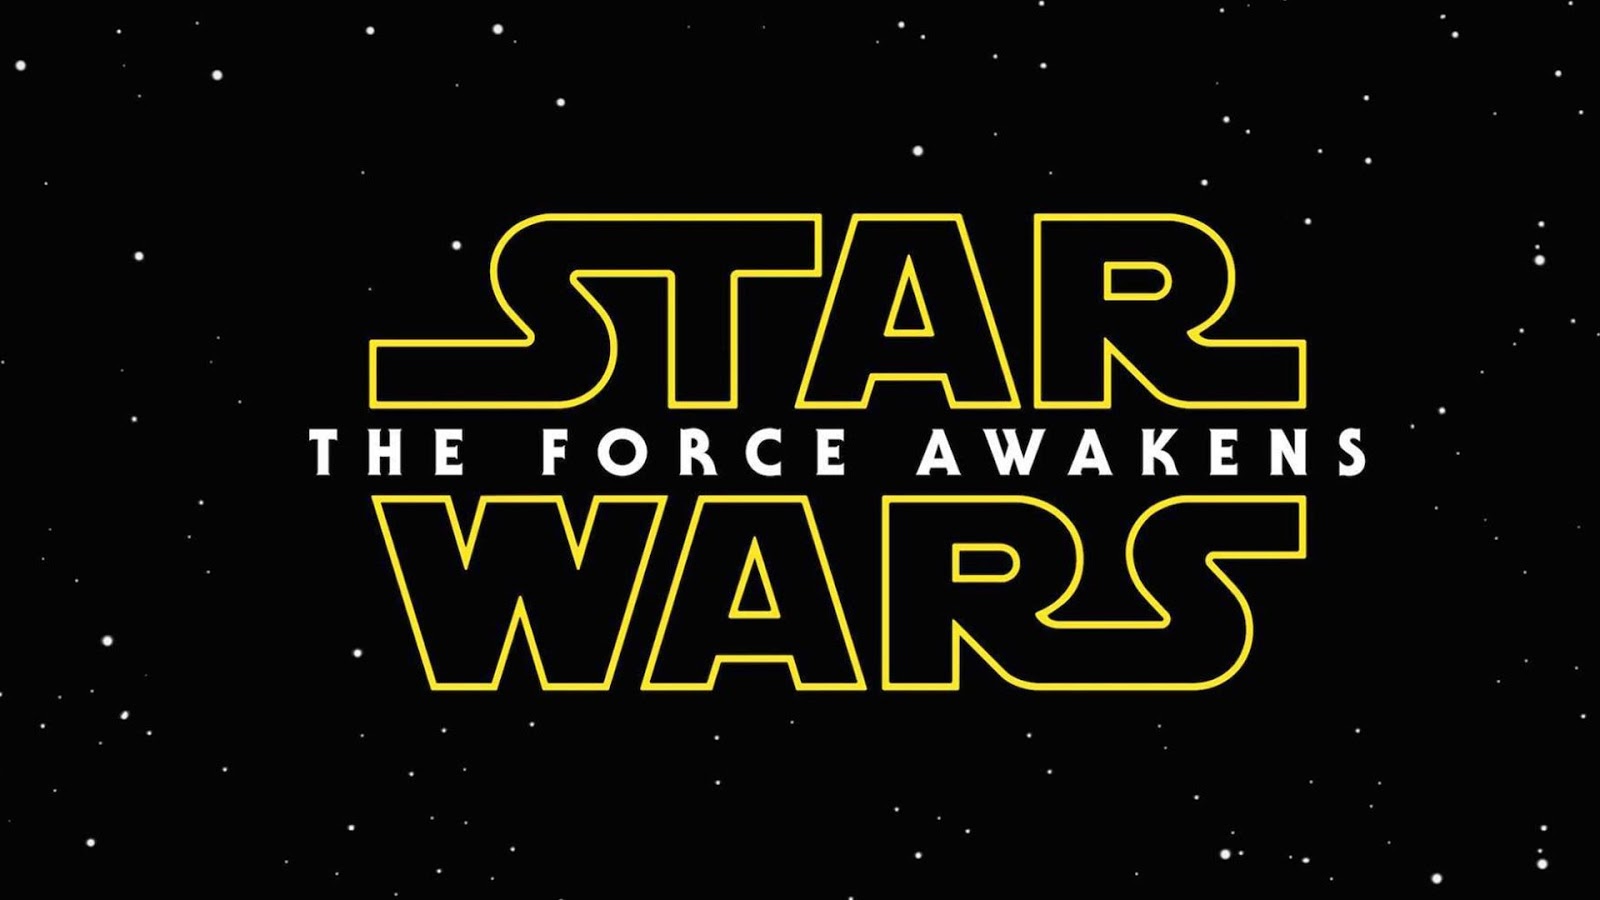 MOVIES: Star Wars: The Force Awakens - New Short Teaser + IMAX takeover news